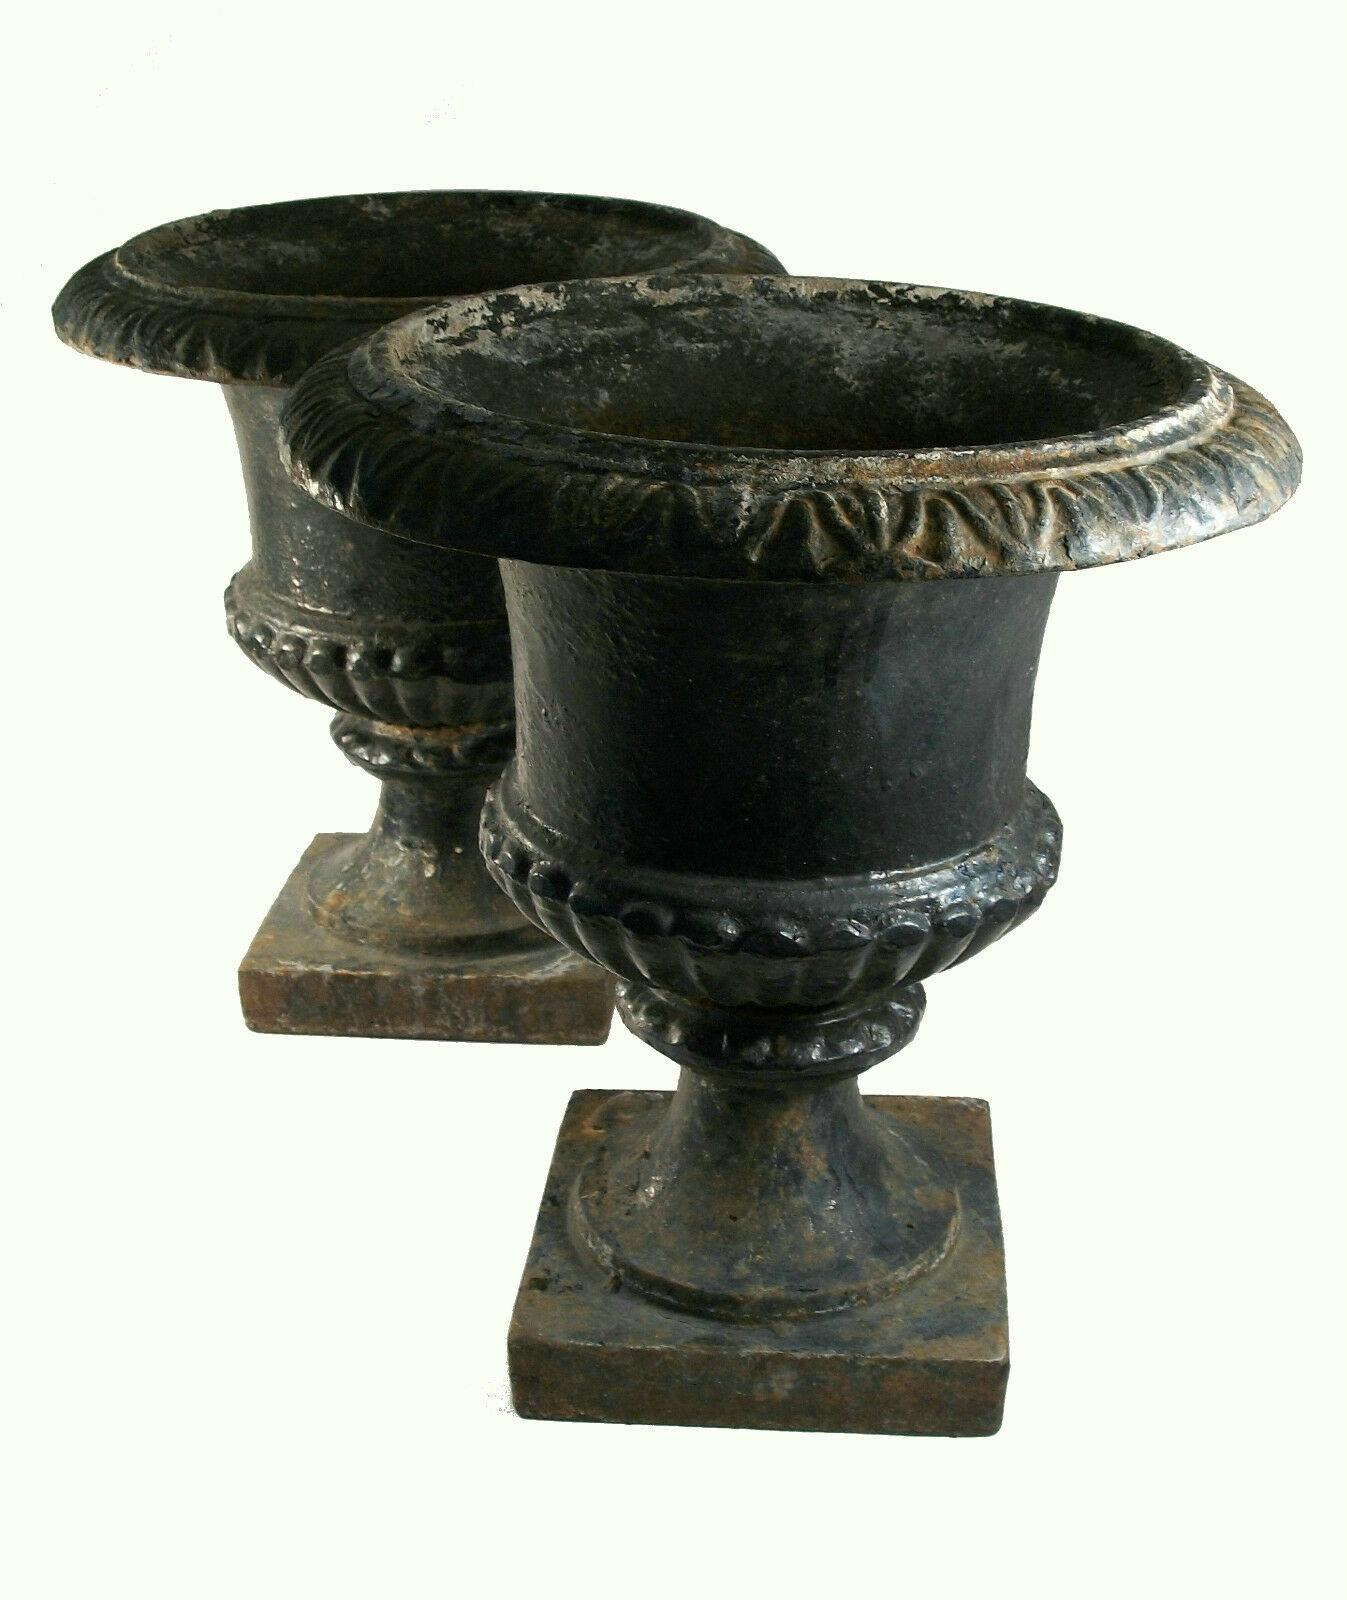 Antique pair of Campagna form cast iron garden urns - three separate cast pieces in each urn - unsigned - United States - late 19th century.

The over-all condition of this pair of pre-owned antique items is excellent - no loss - no damage - no